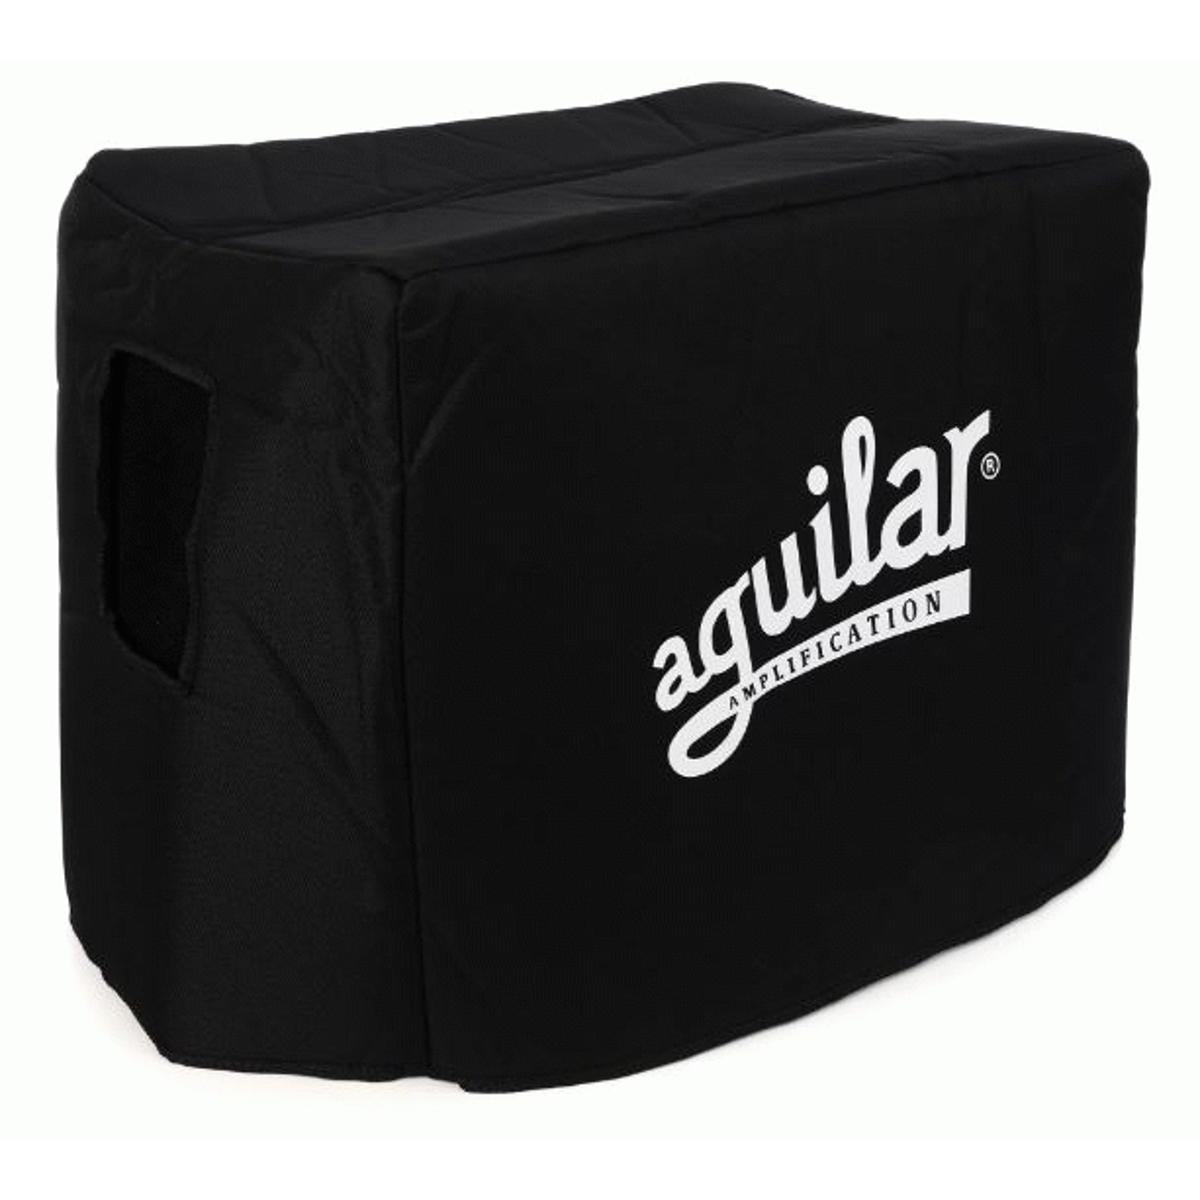 Aguilar Cover for SL 210 Cabinet